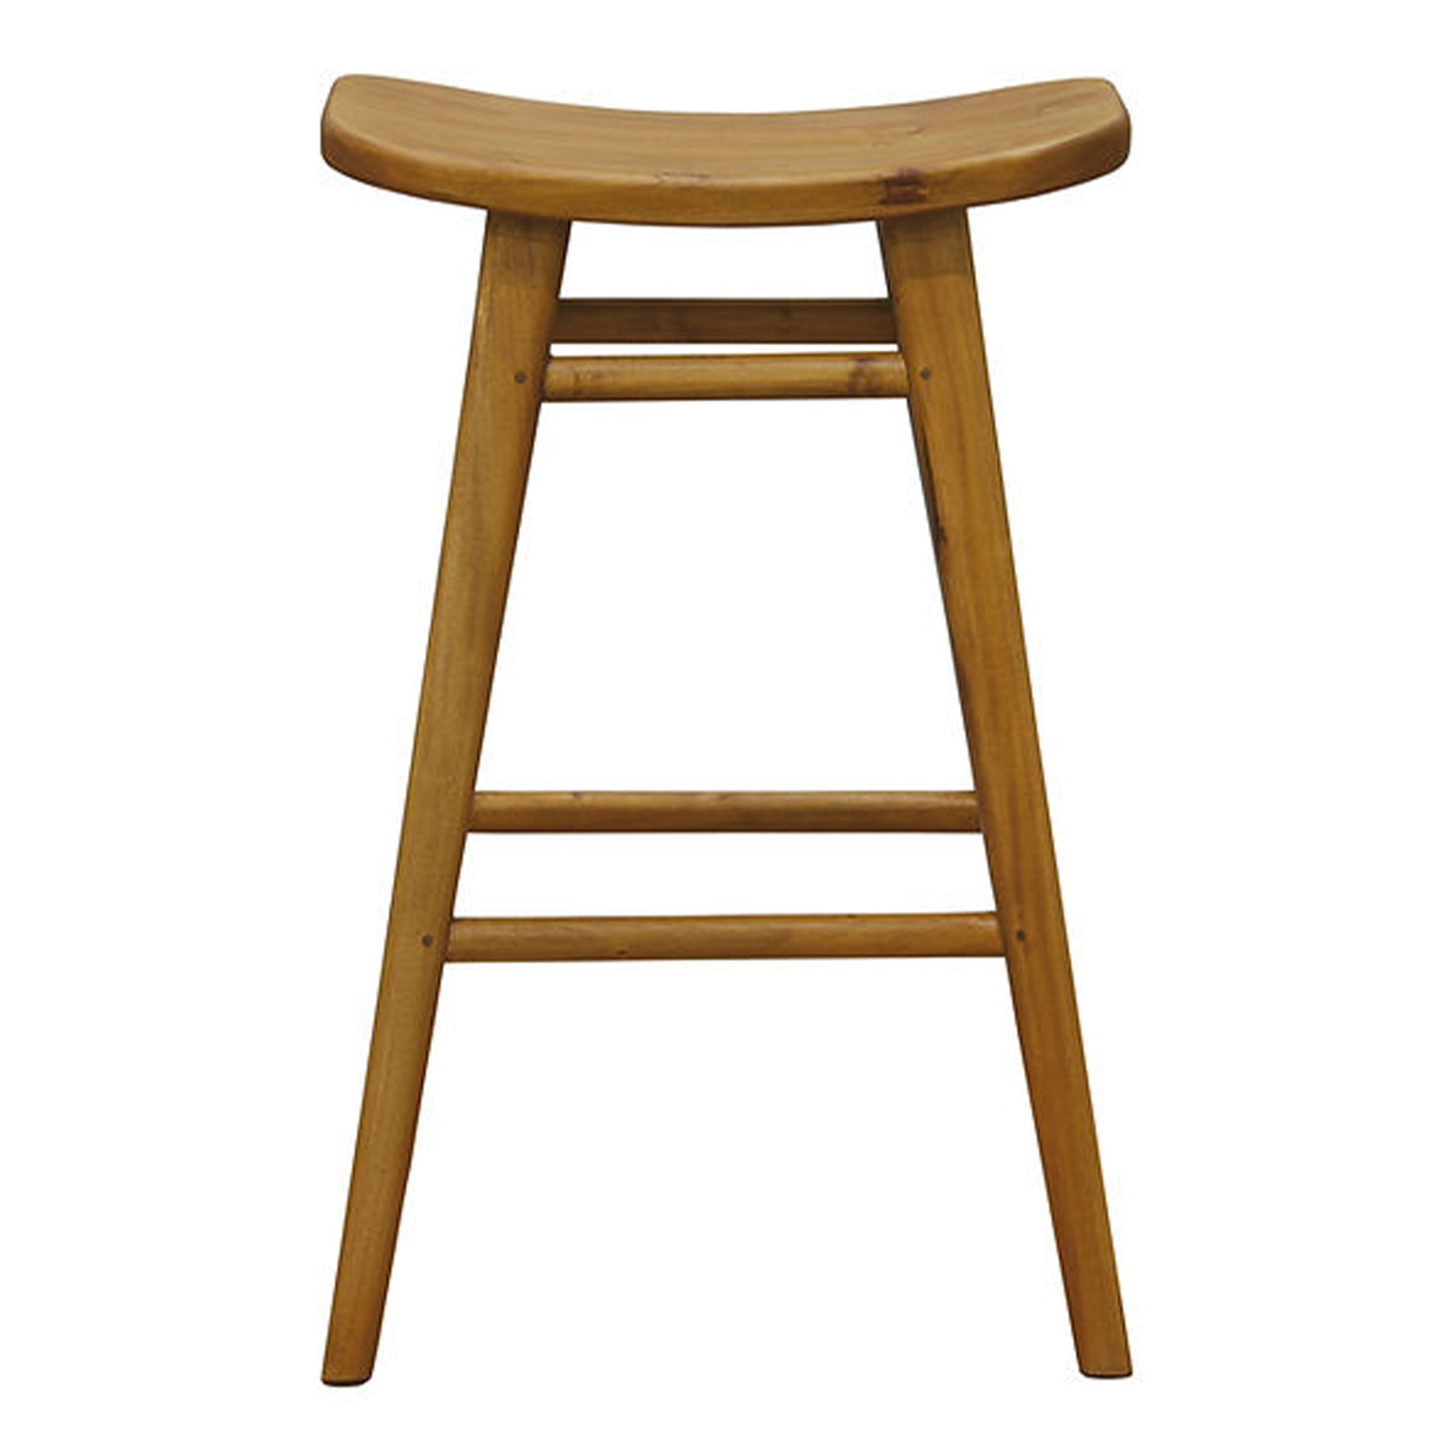 Caramel Oval Solid Timber Kitchen Counter Barstool